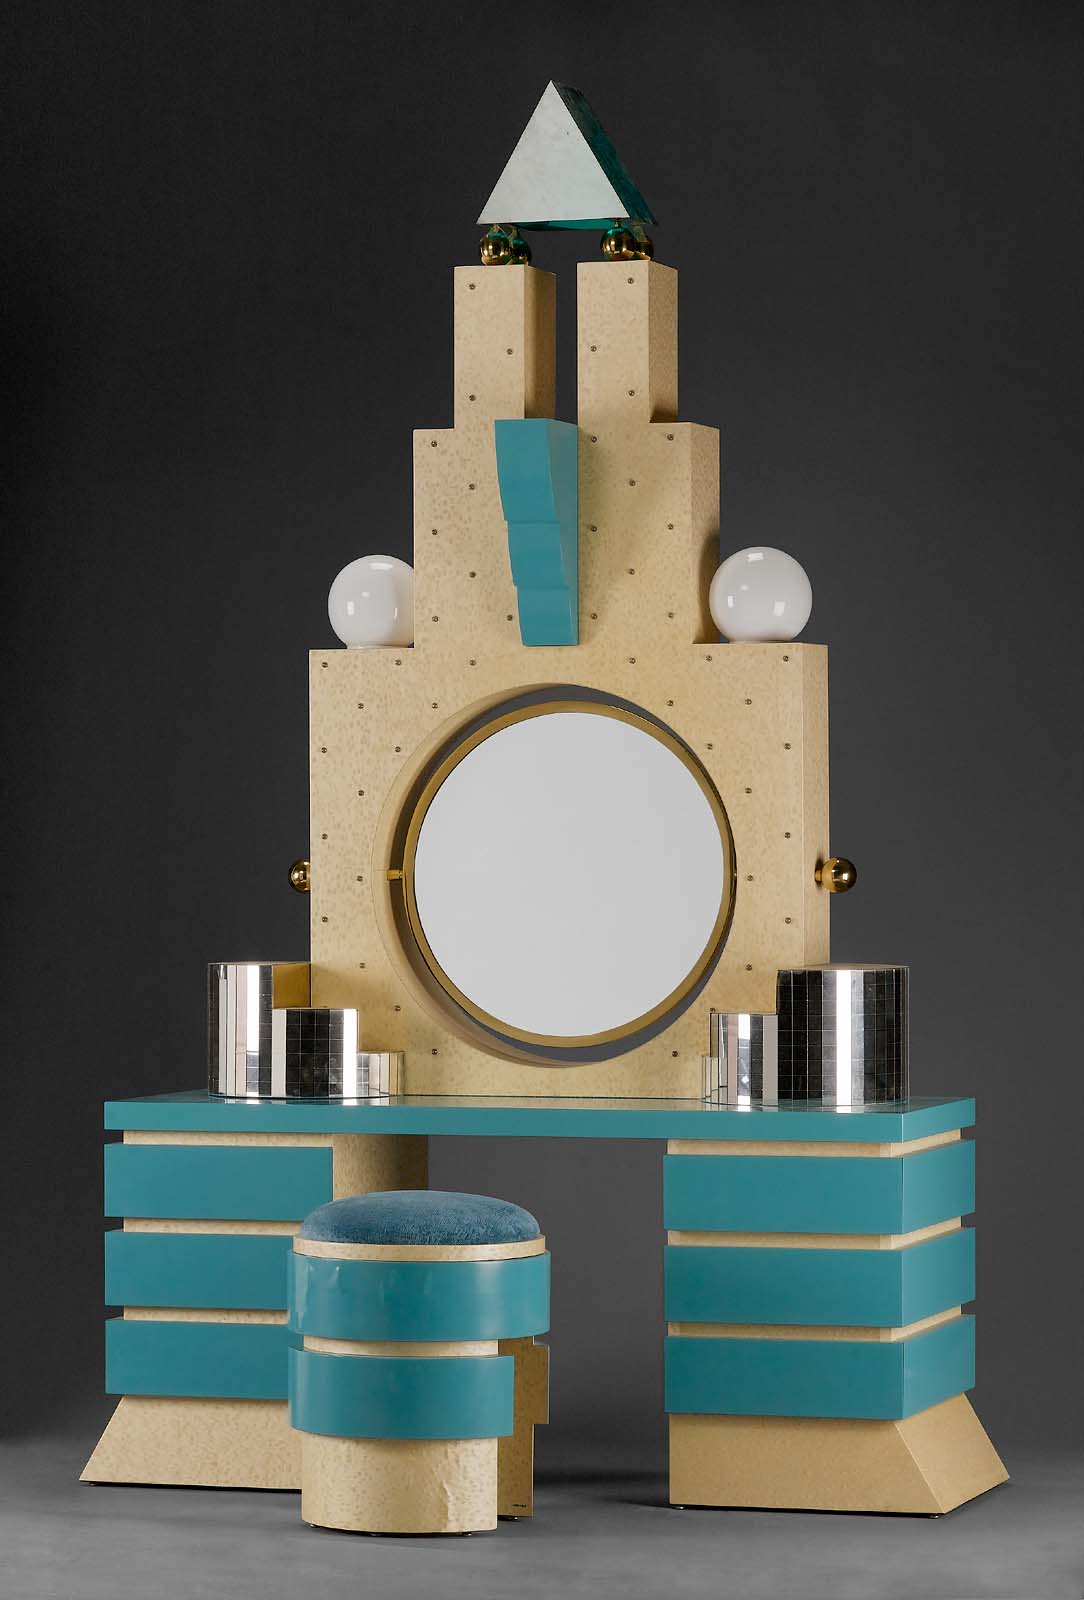 Plaza dressing table by Michael Graves